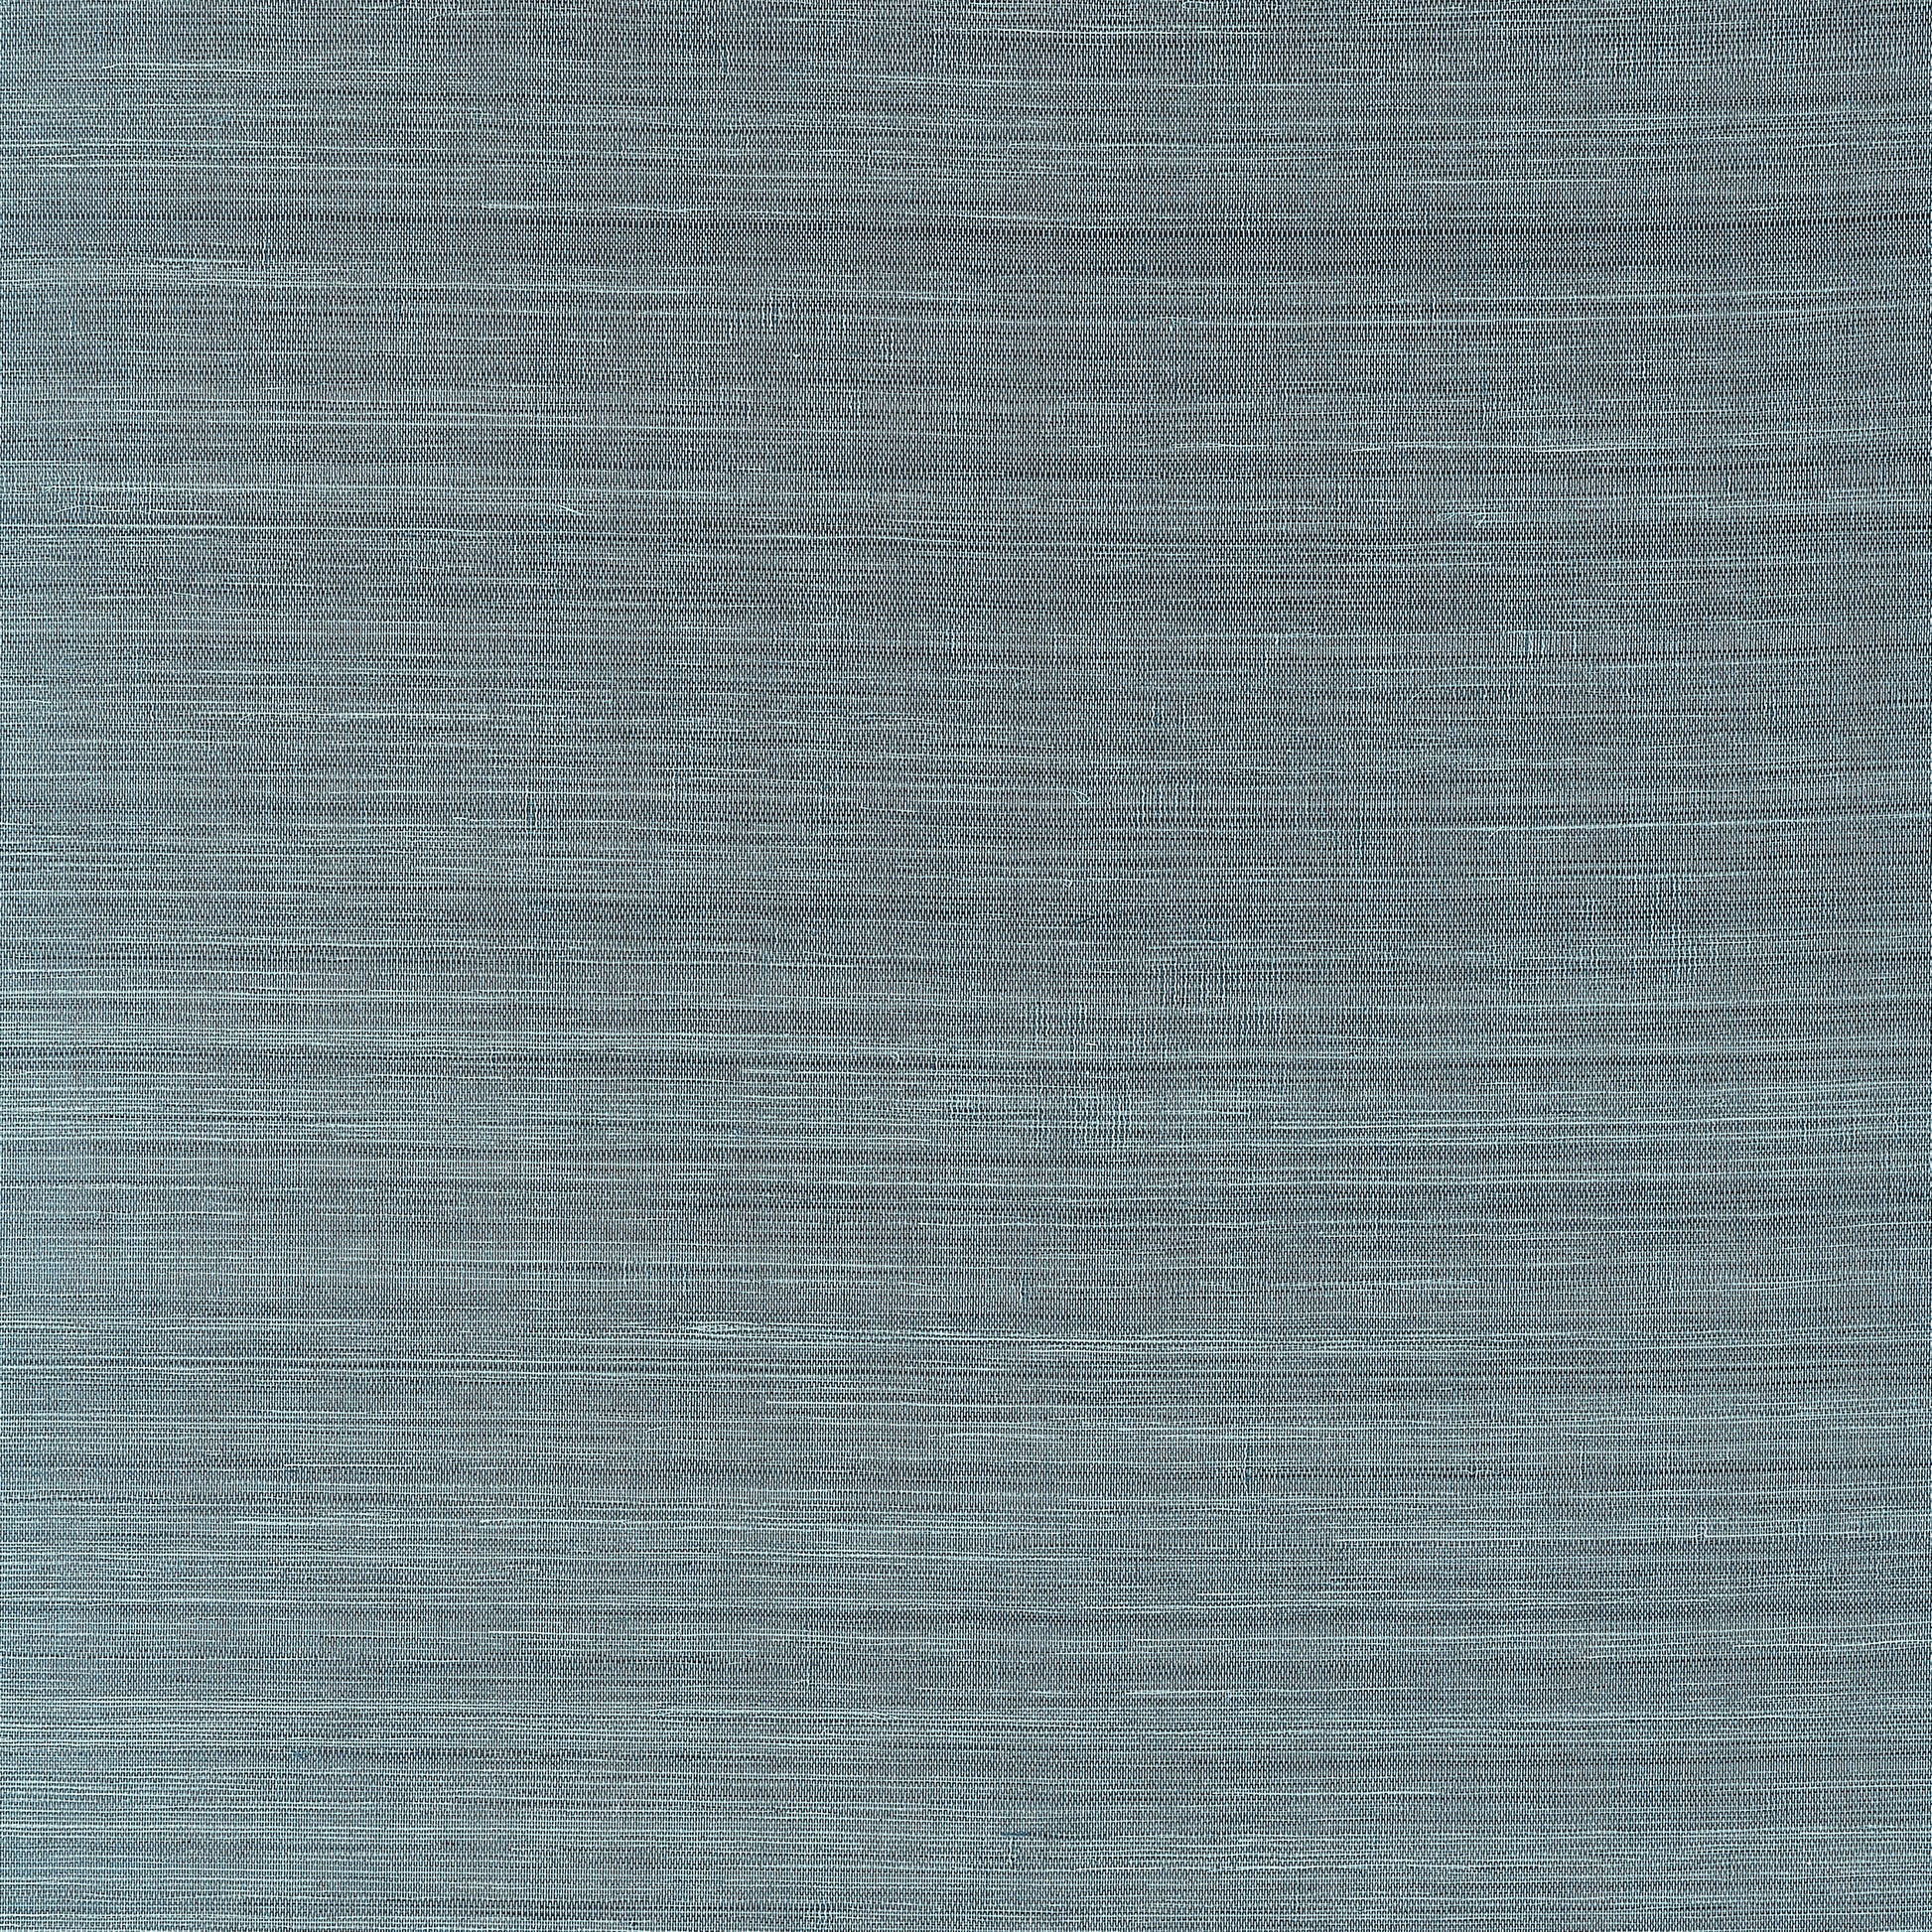 Purchase Thibaut Wallpaper Item T19666 pattern name Windward Sisal color Dusty Teal. 